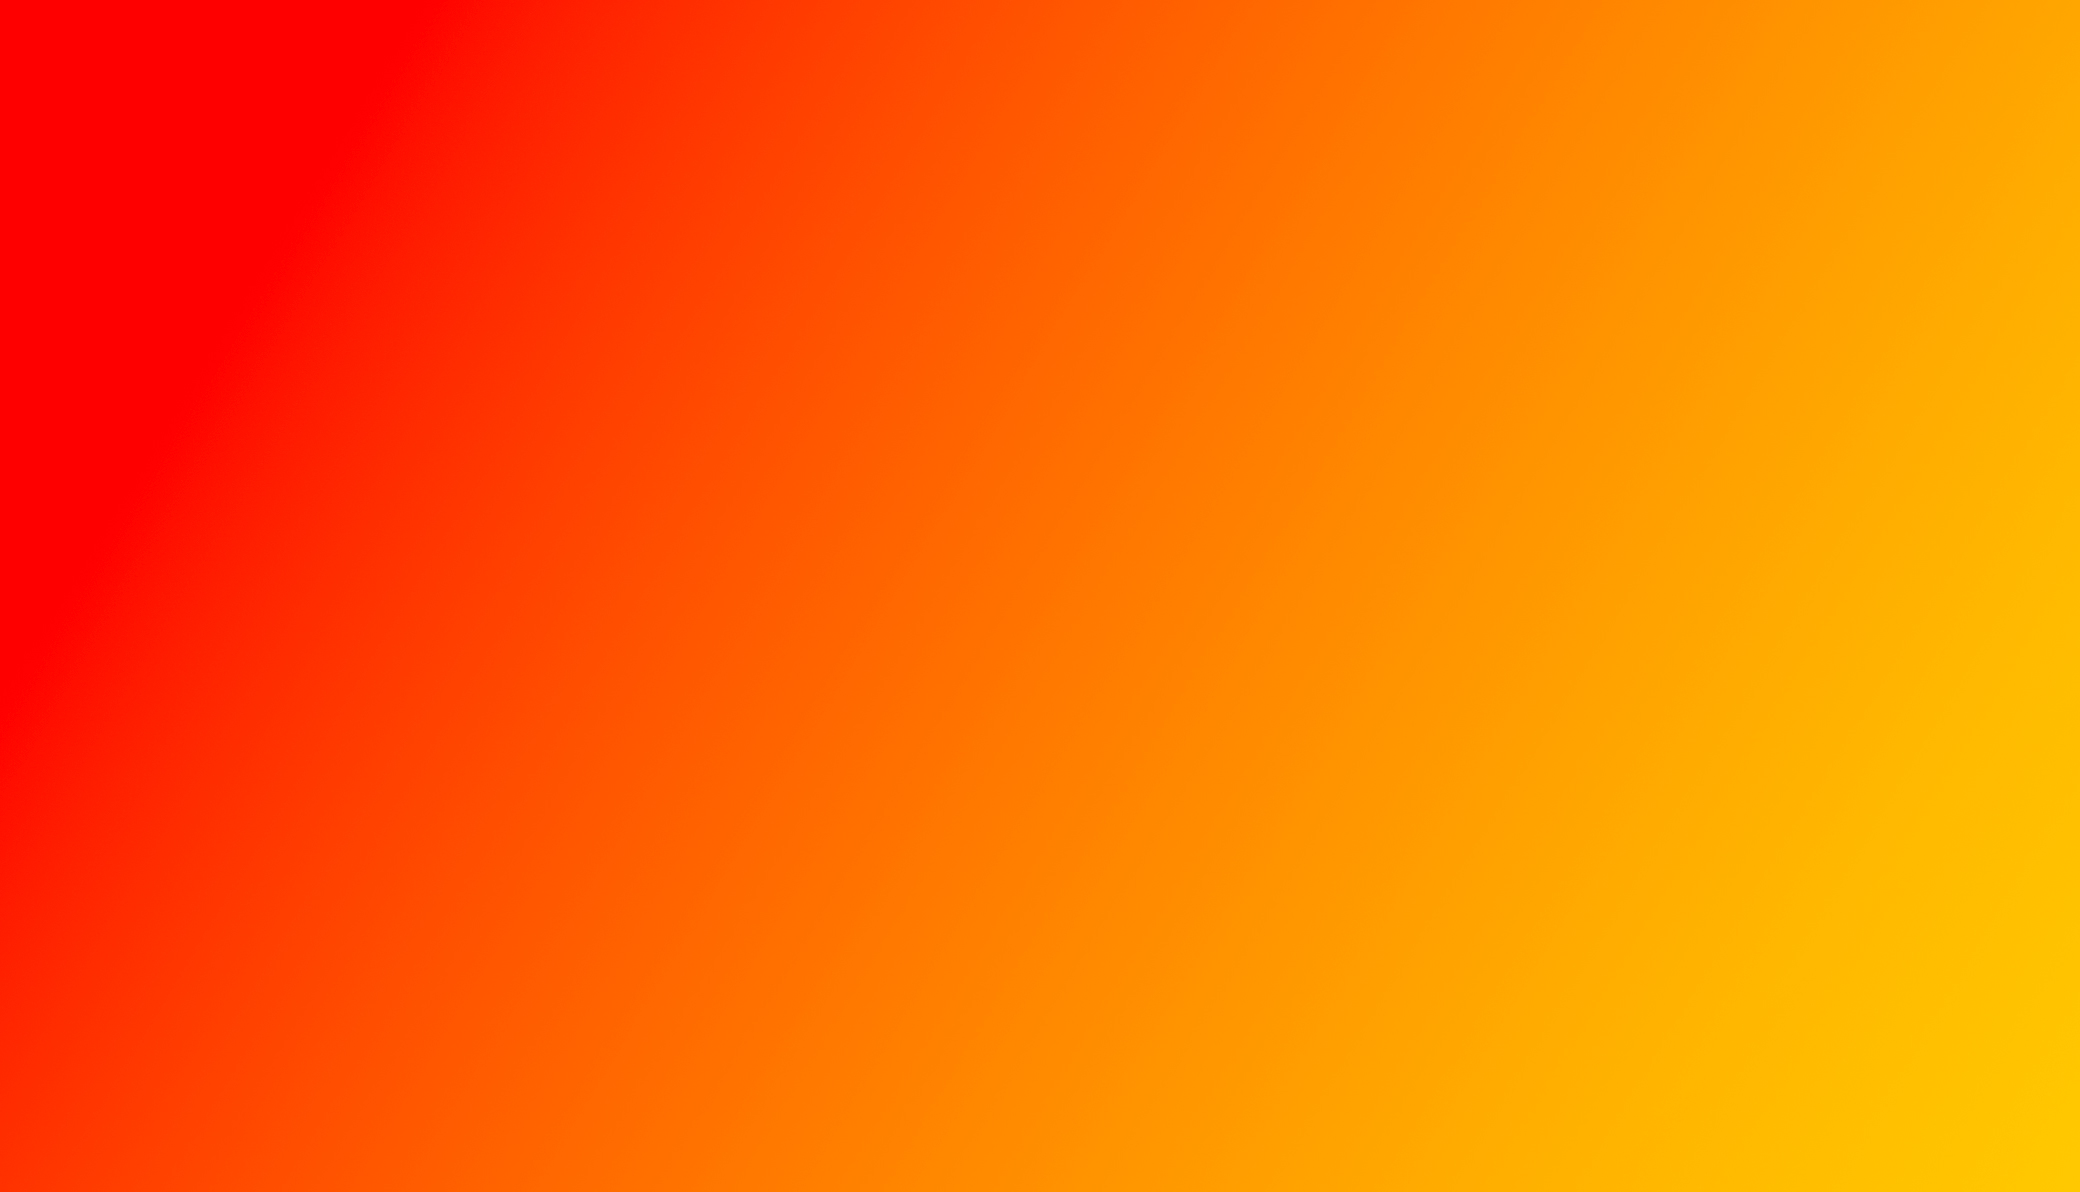 Red to Yellow Gradient